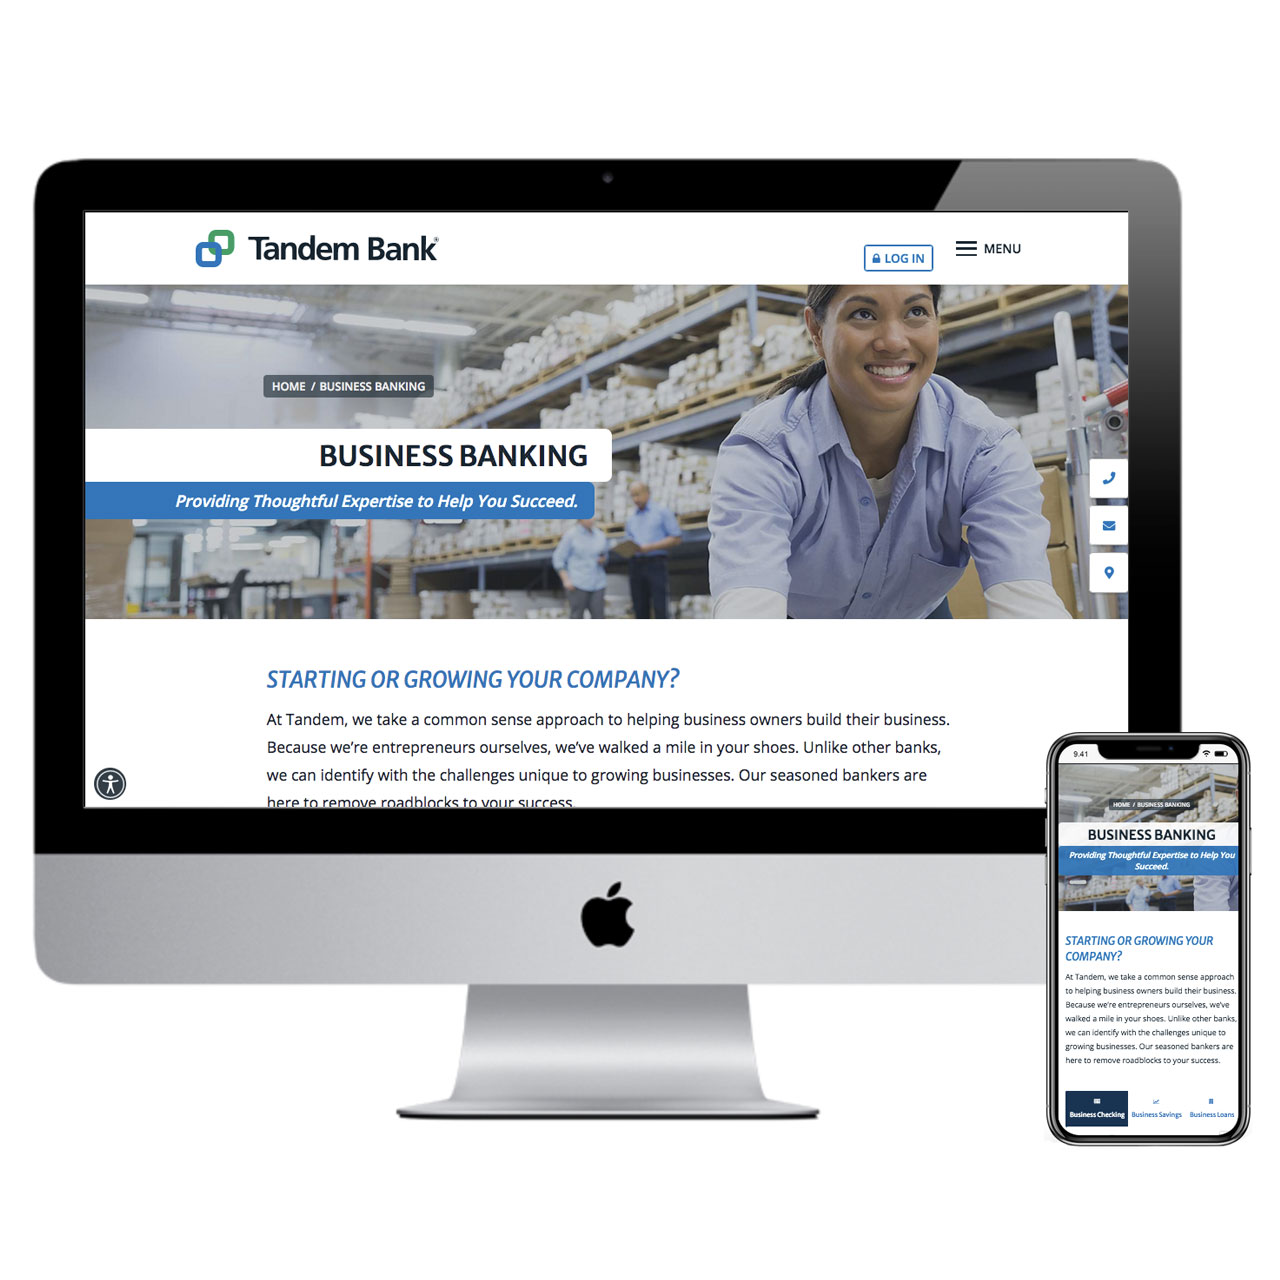 Tandem Bank website shown on iMac and mobile phone